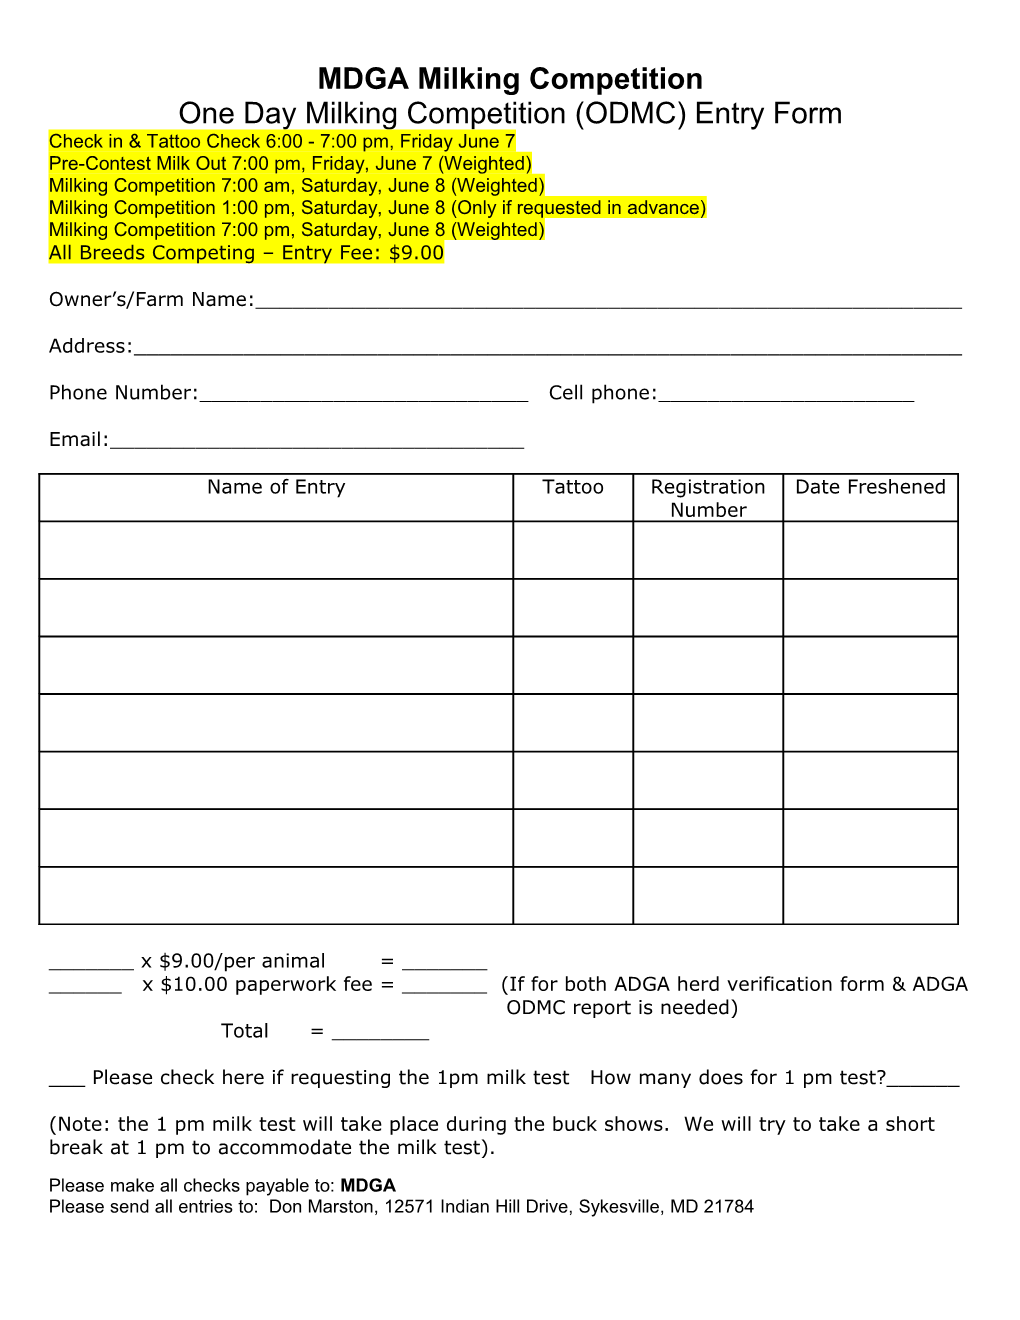 One Day Milking Competition (ODMC) Entry Form